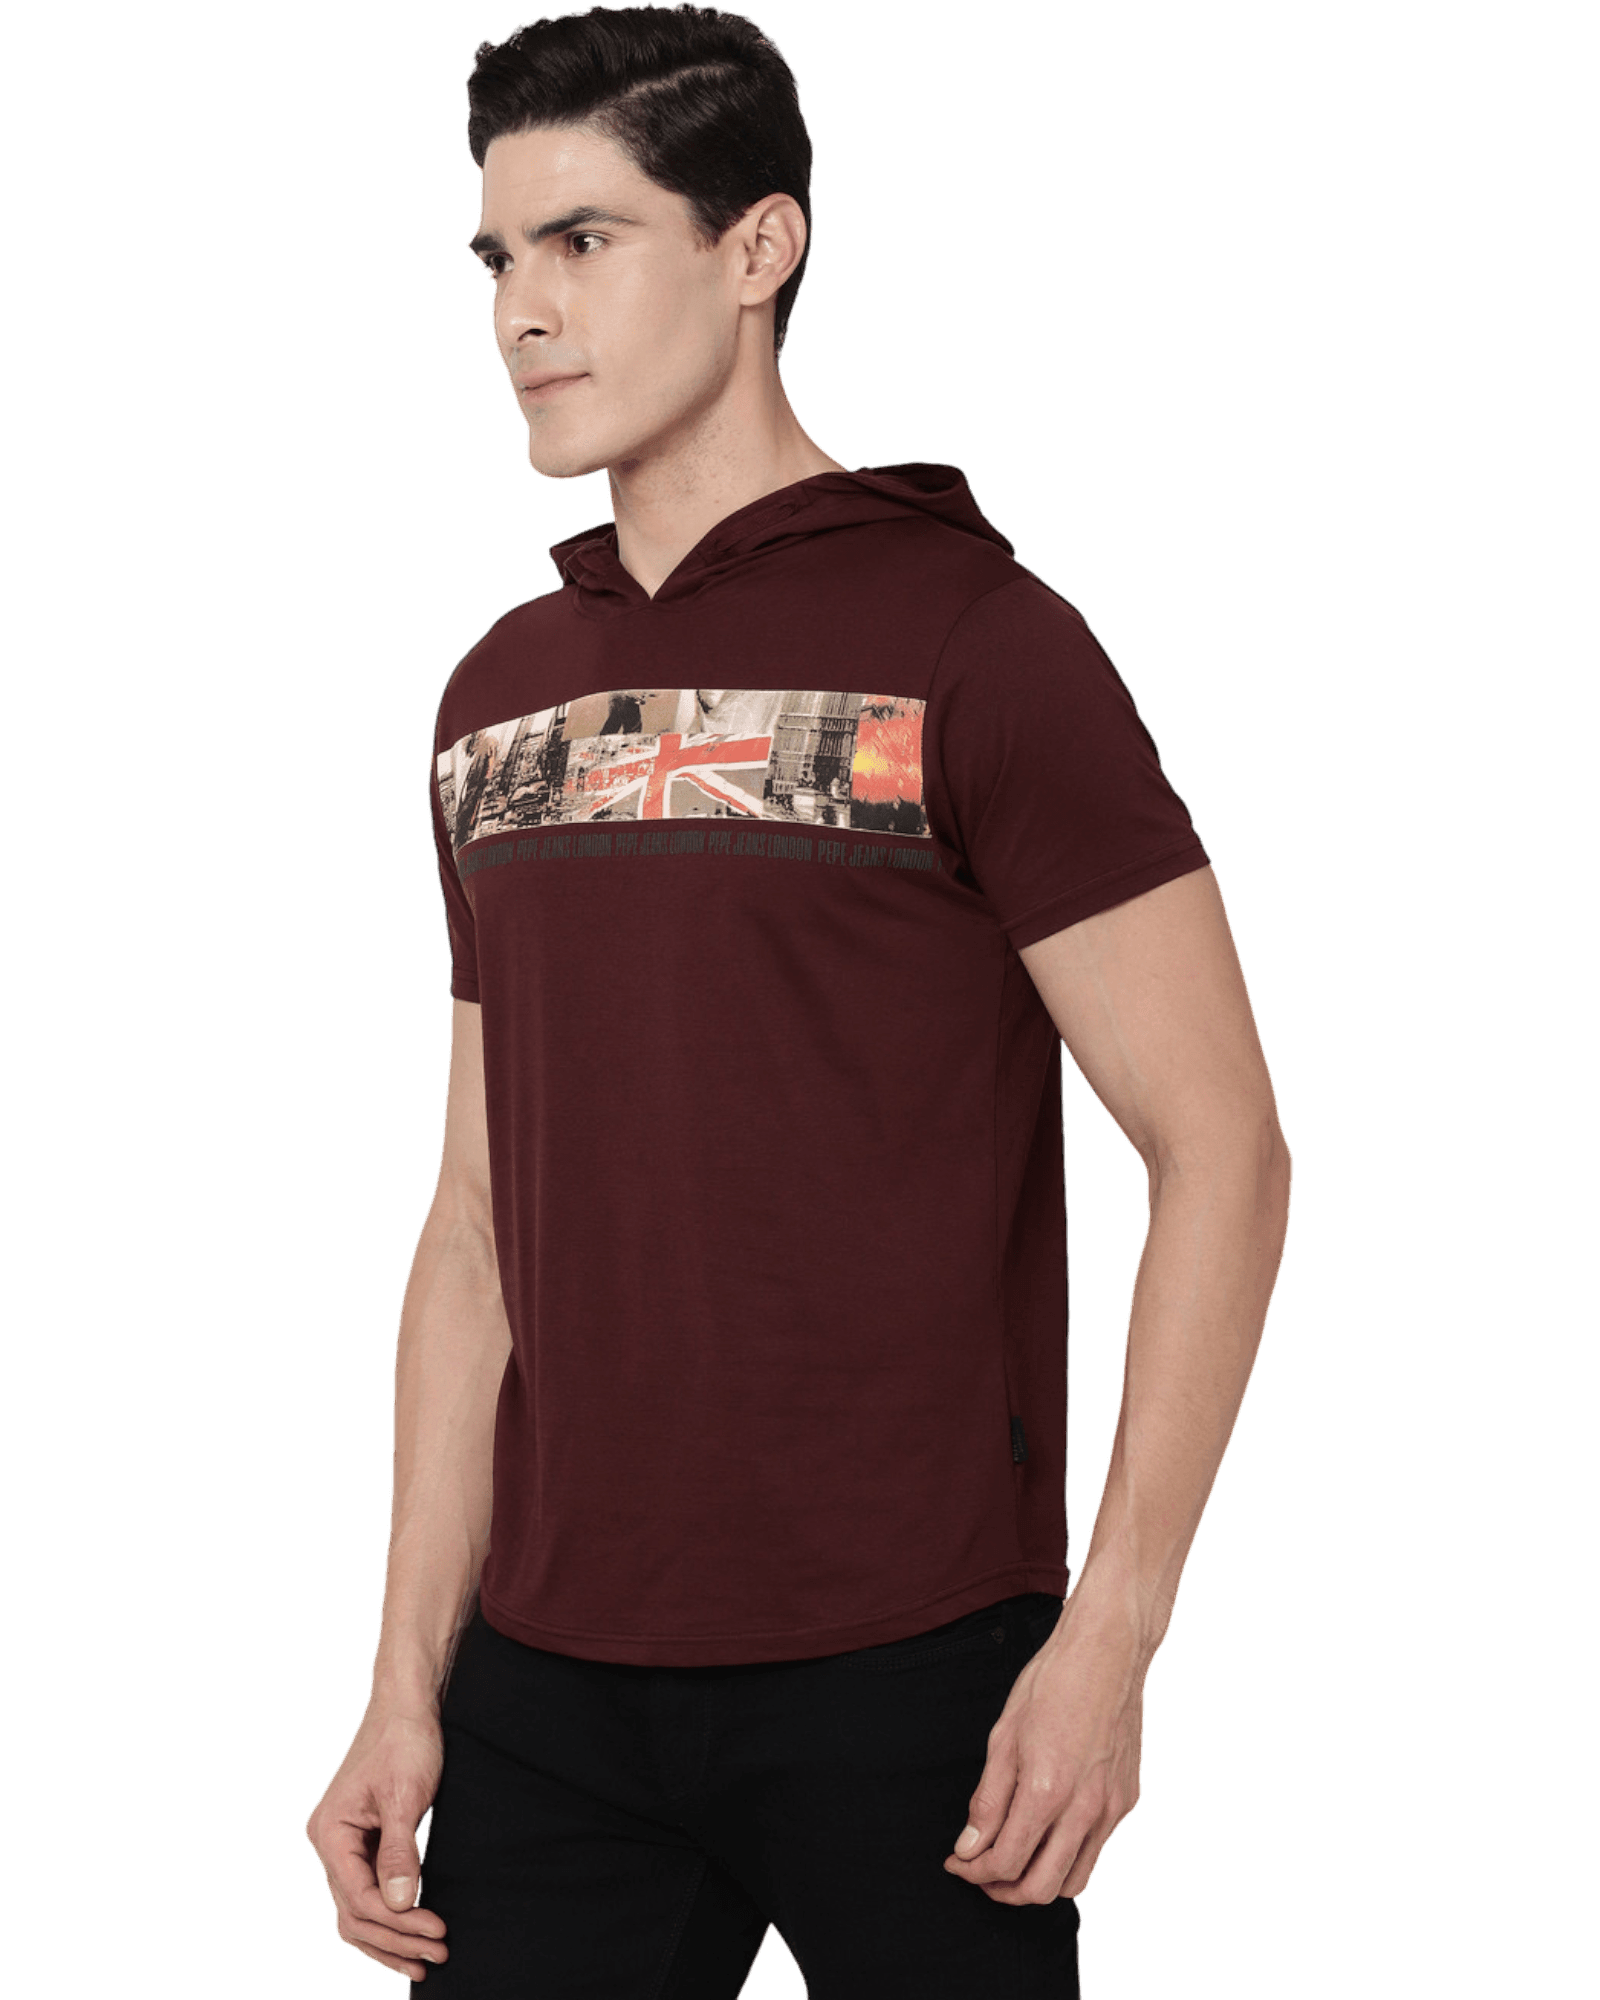 Pepe Jeans Brand Print Slim Fit Hooded T-shirt For Men - Apparel For Less